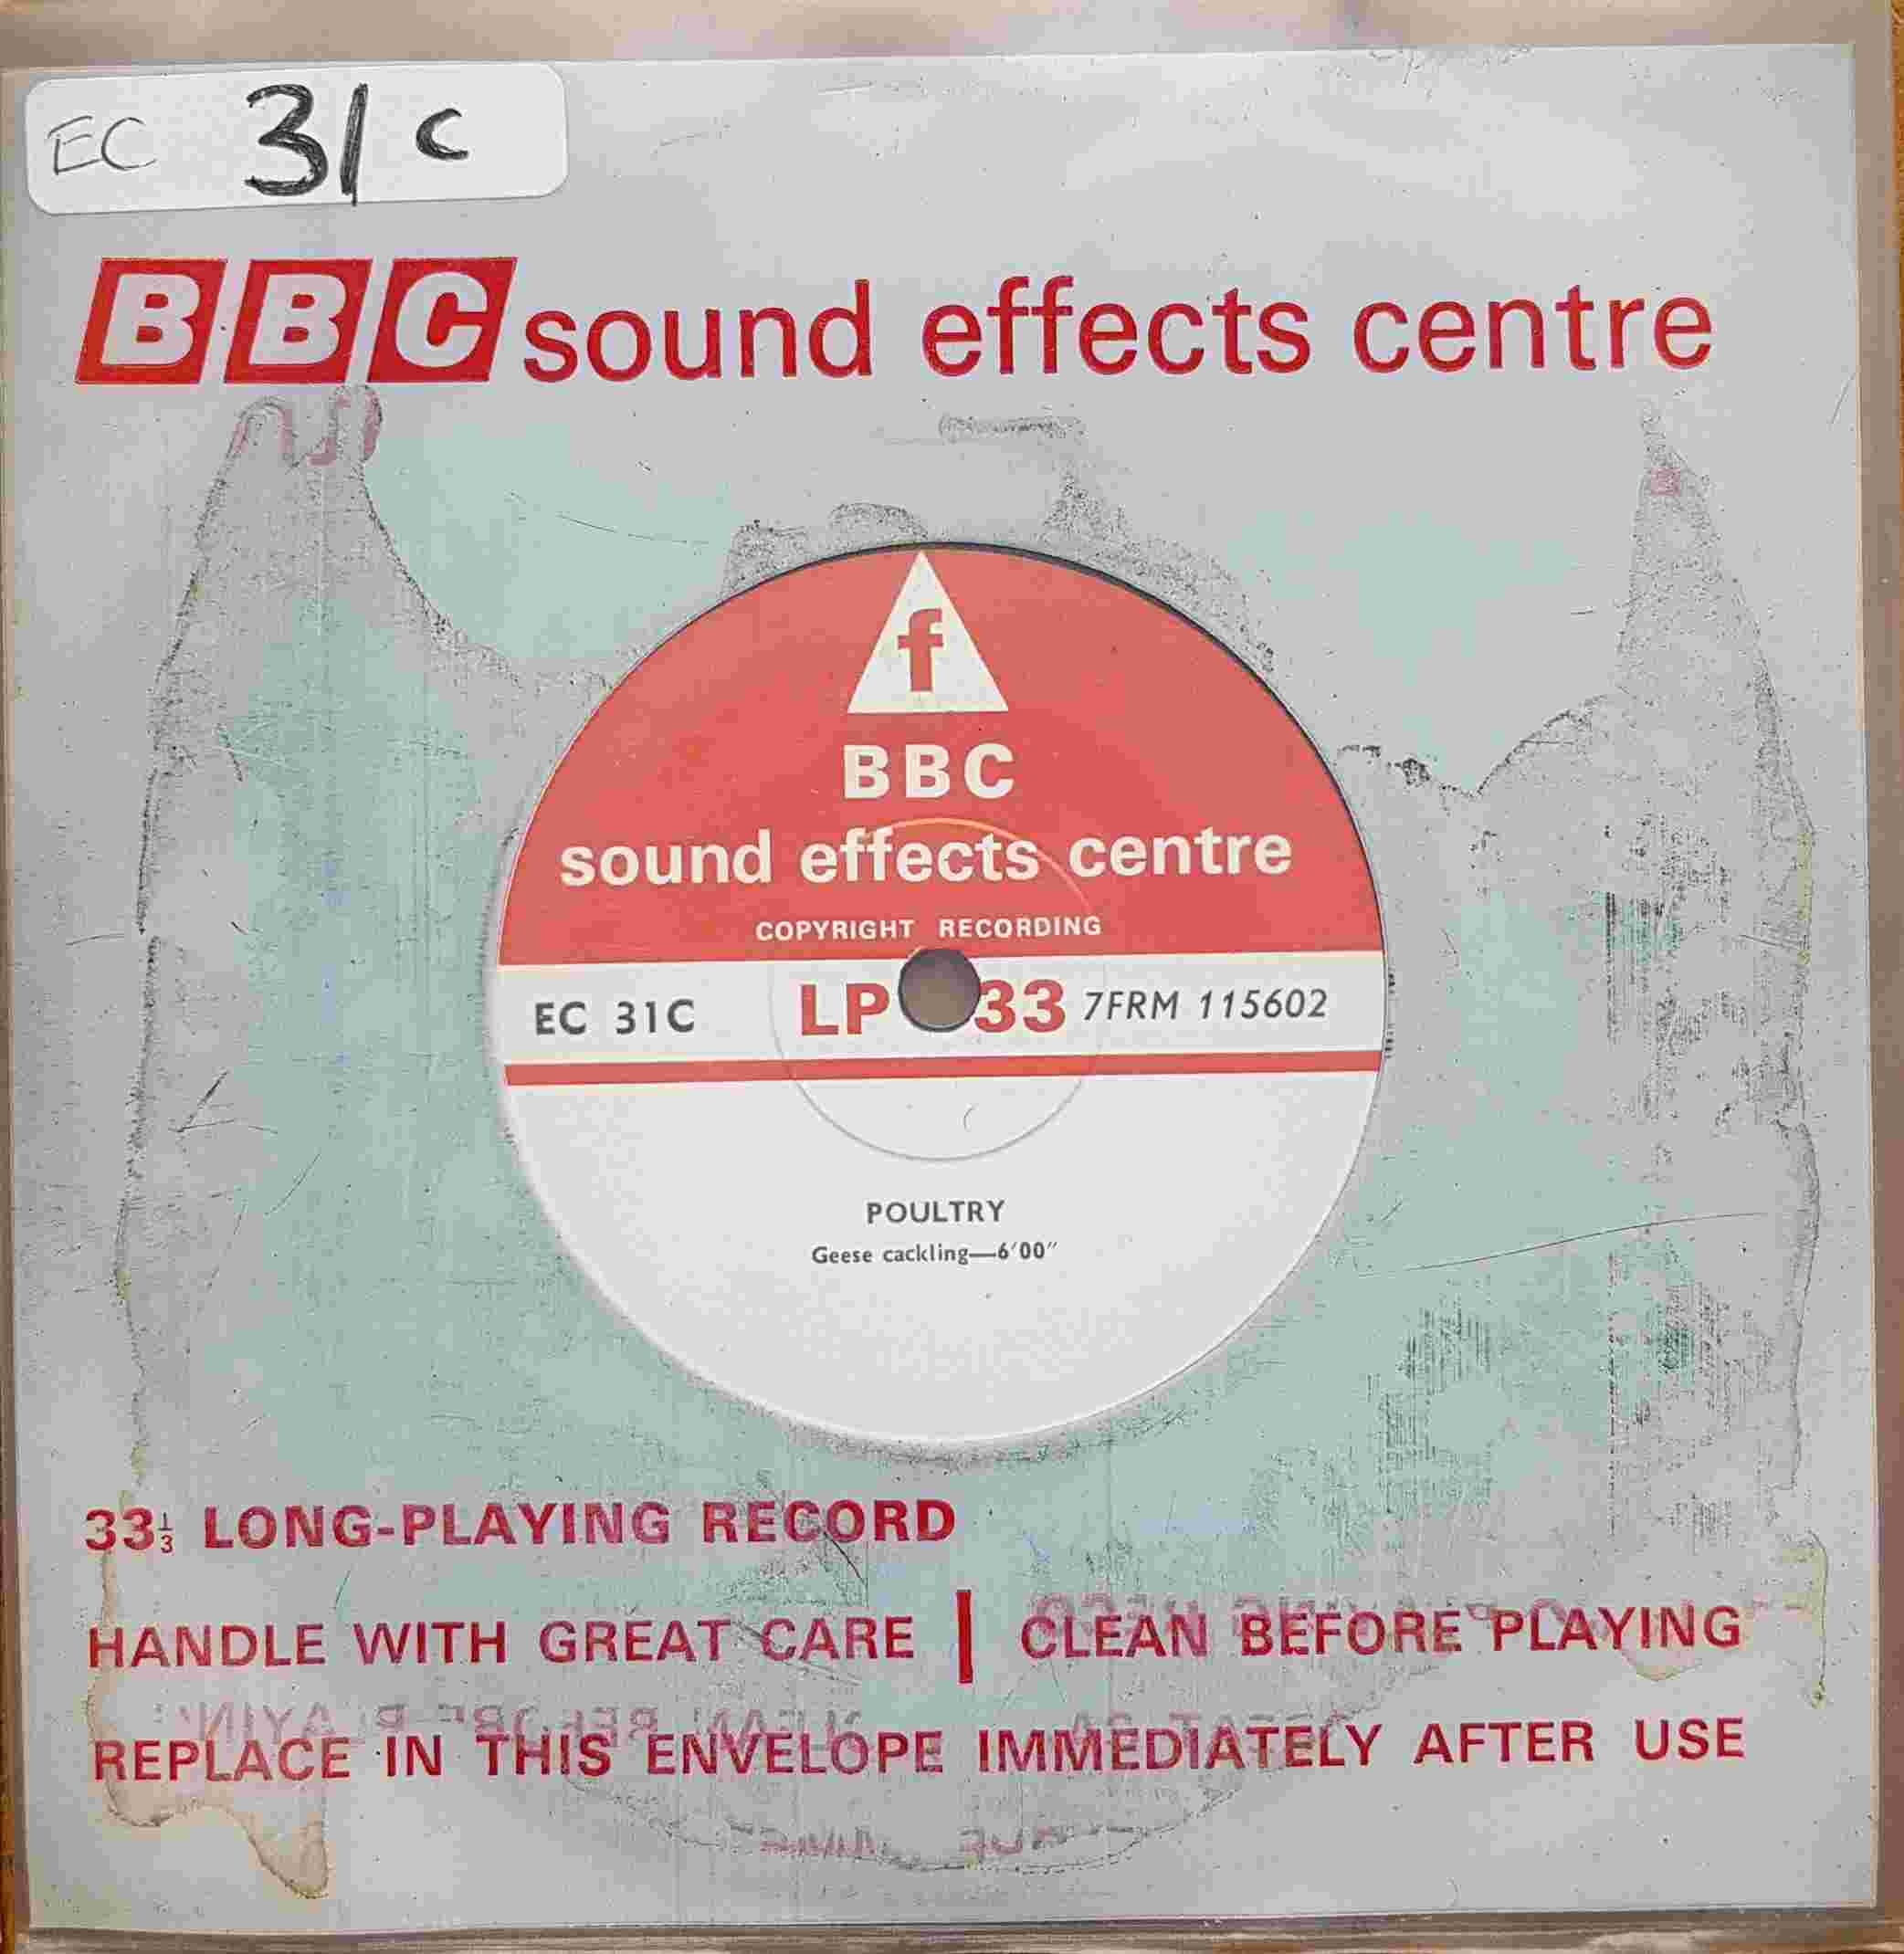 Picture of EC 31C Poultry by artist Not registered from the BBC singles - Records and Tapes library